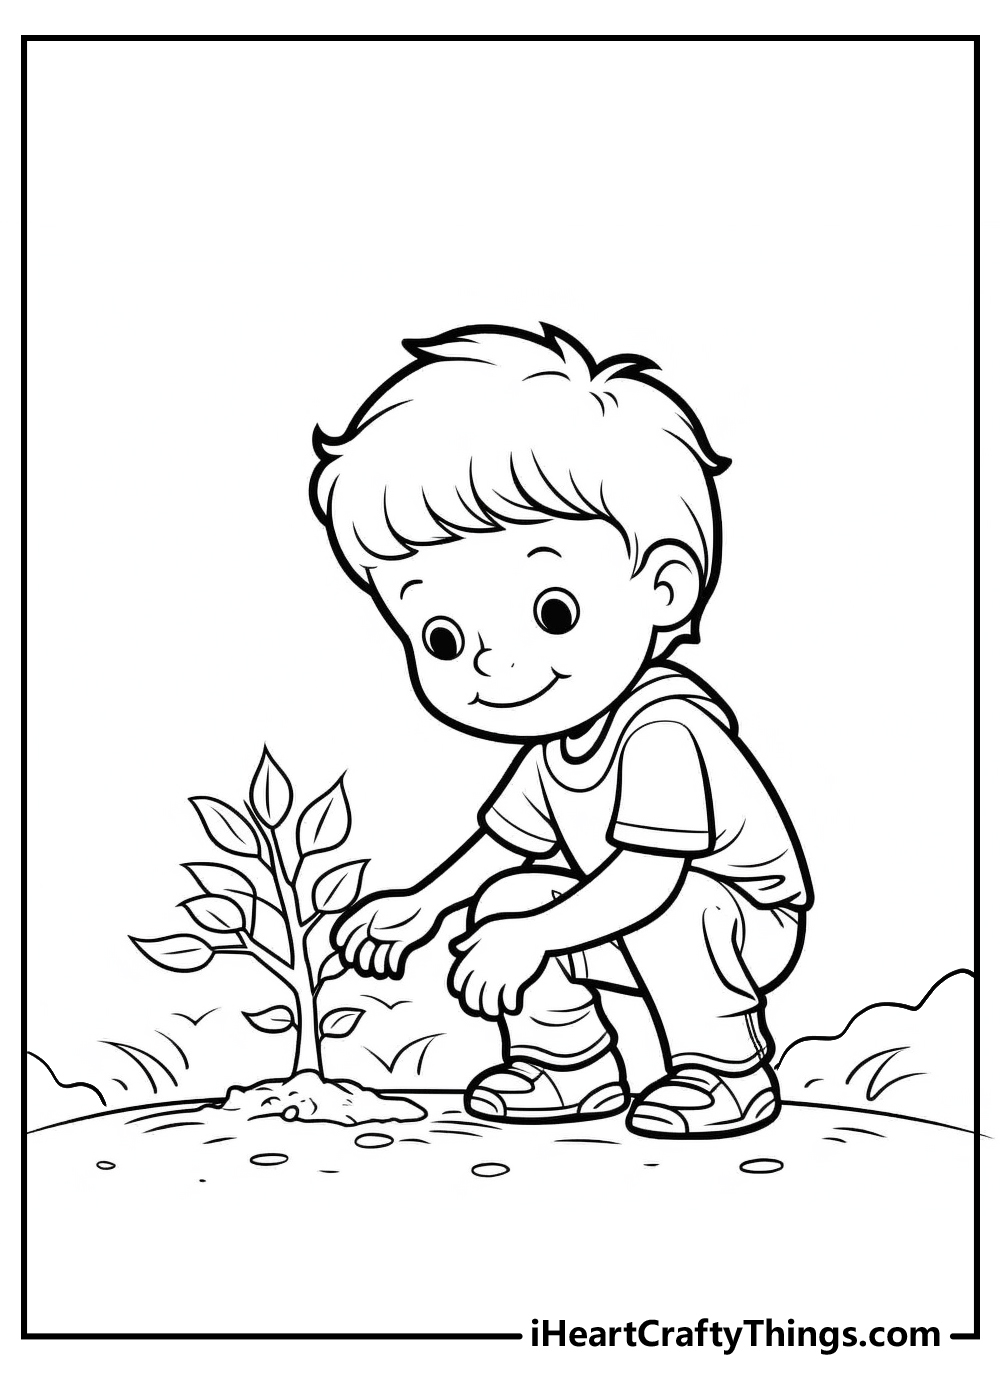 kindness coloring sheet free download